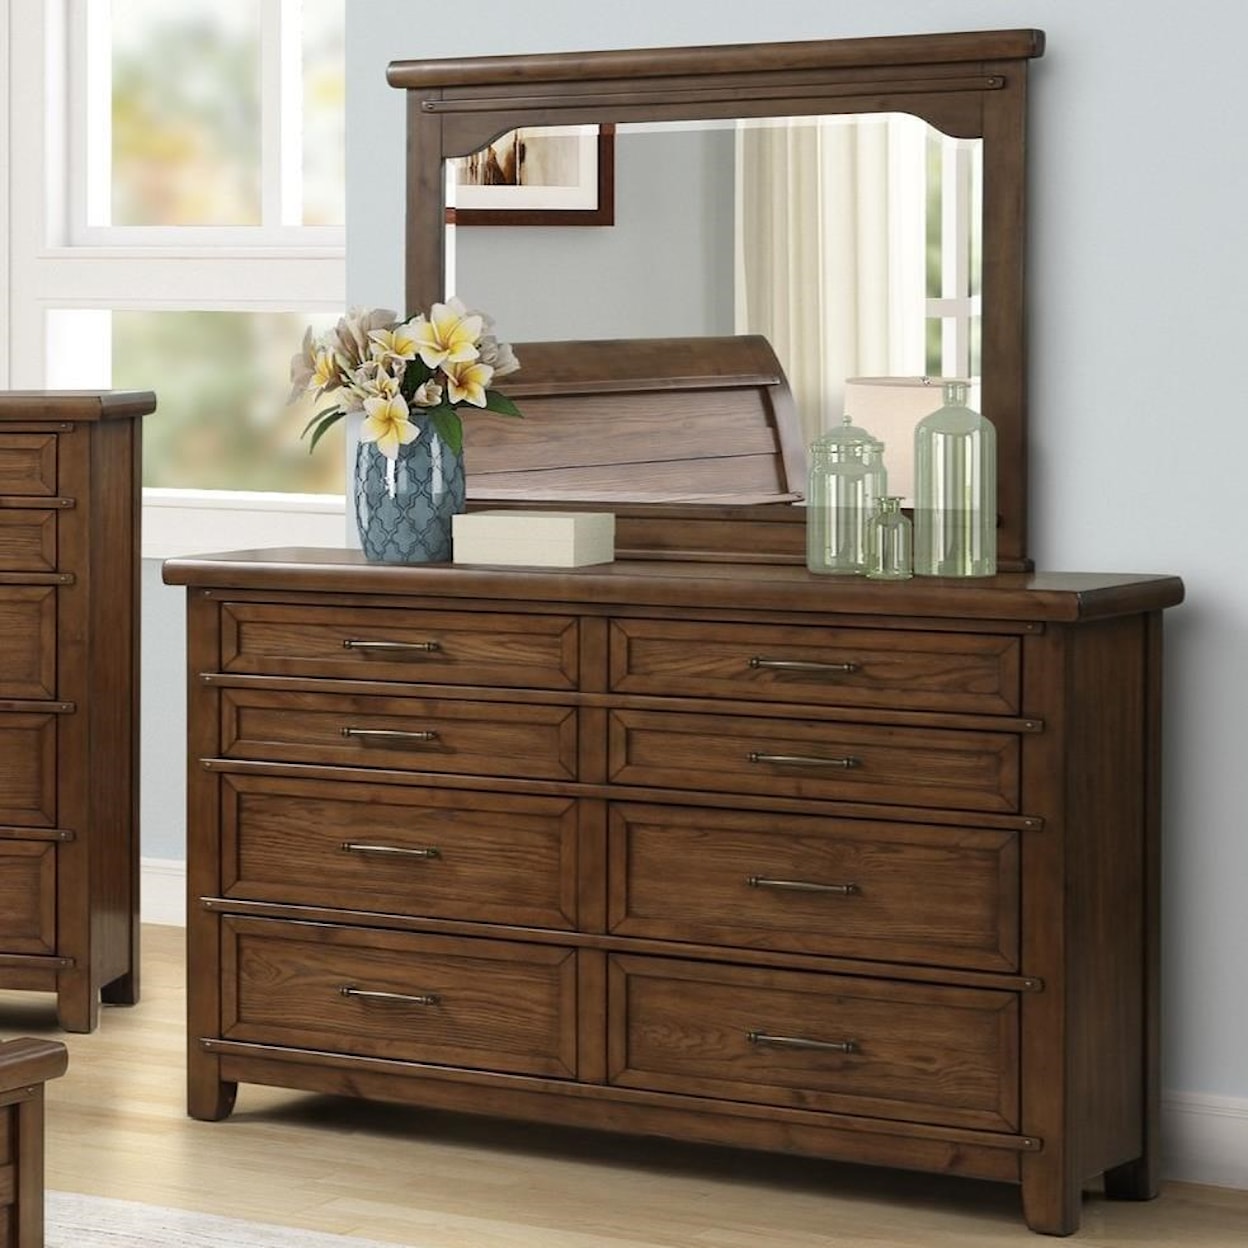 New Classic Fairfax County Dresser and Mirror